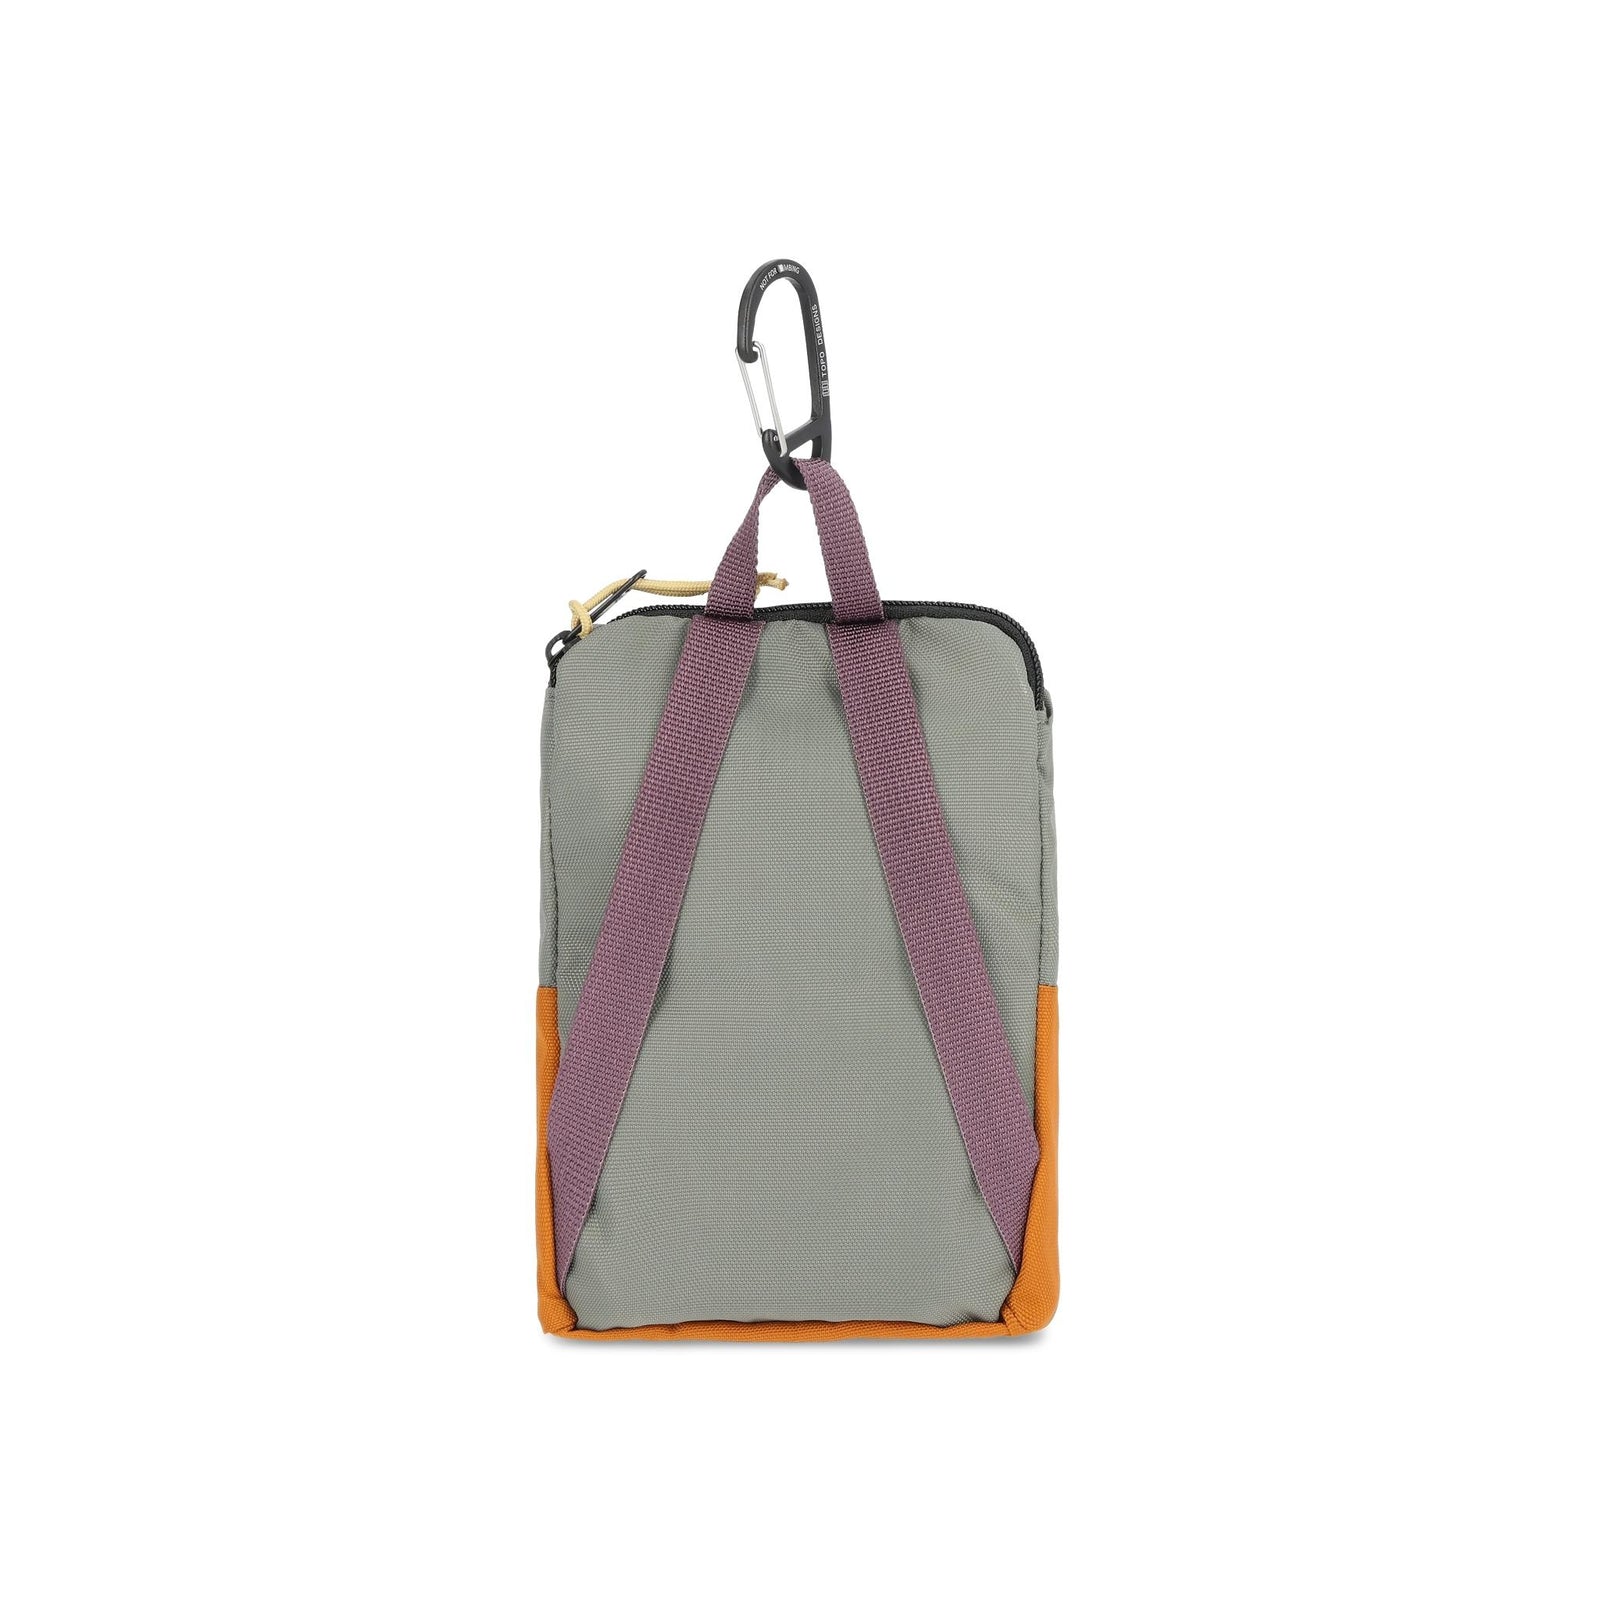 Back View of Topo Designs Rover Pack Micro in "Beetle / Spice"